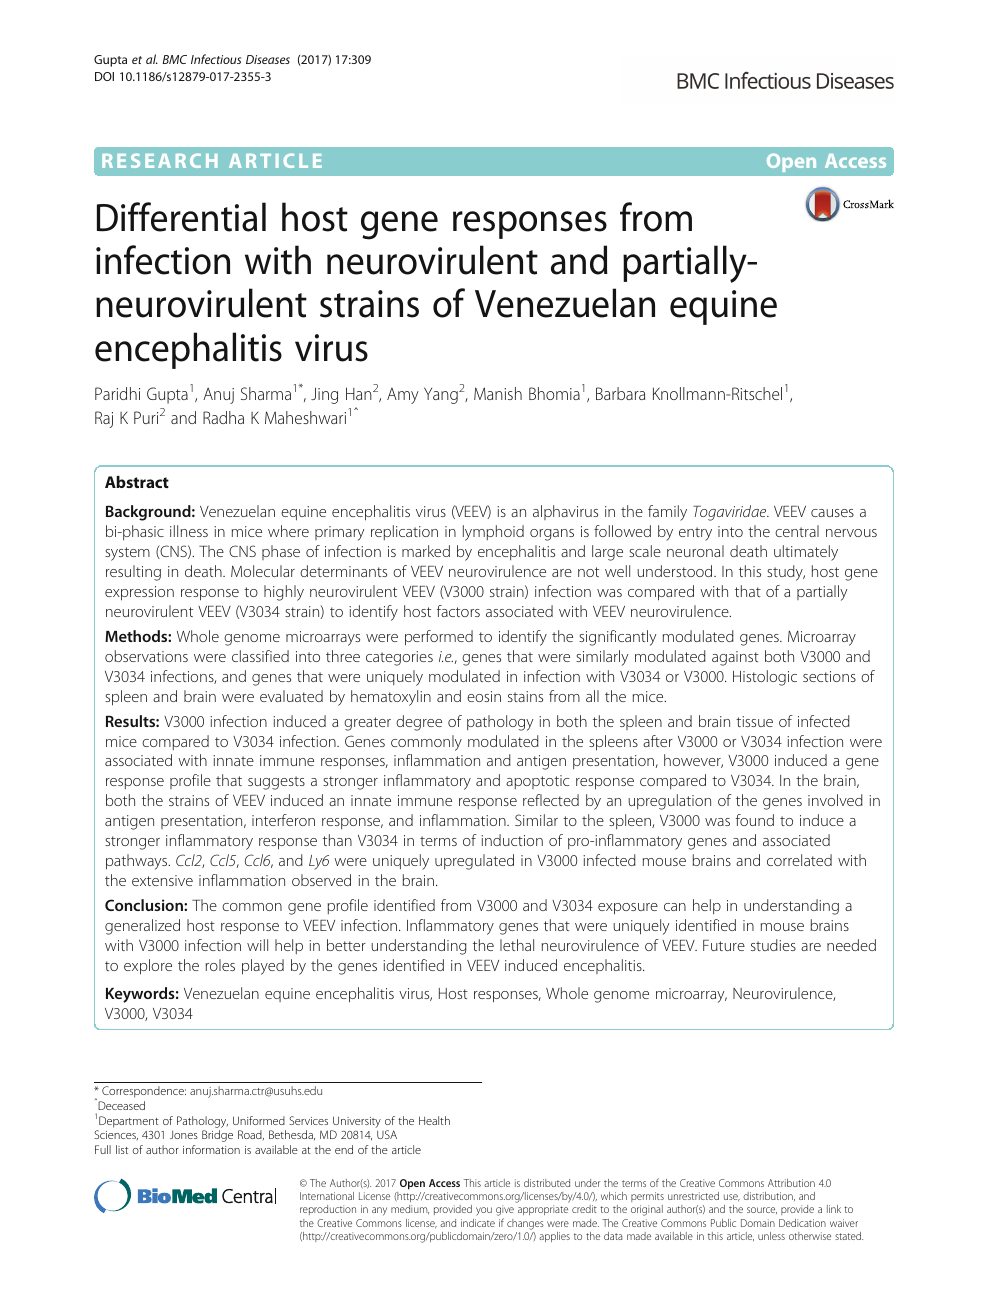 Differential Host Gene Responses From Infection With Neurovirulent And Partially Neurovirulent Strains Of Venezuelan Equine Encephalitis Virus Topic Of Research Paper In Biological Sciences Download Scholarly Article Pdf And Read For Free